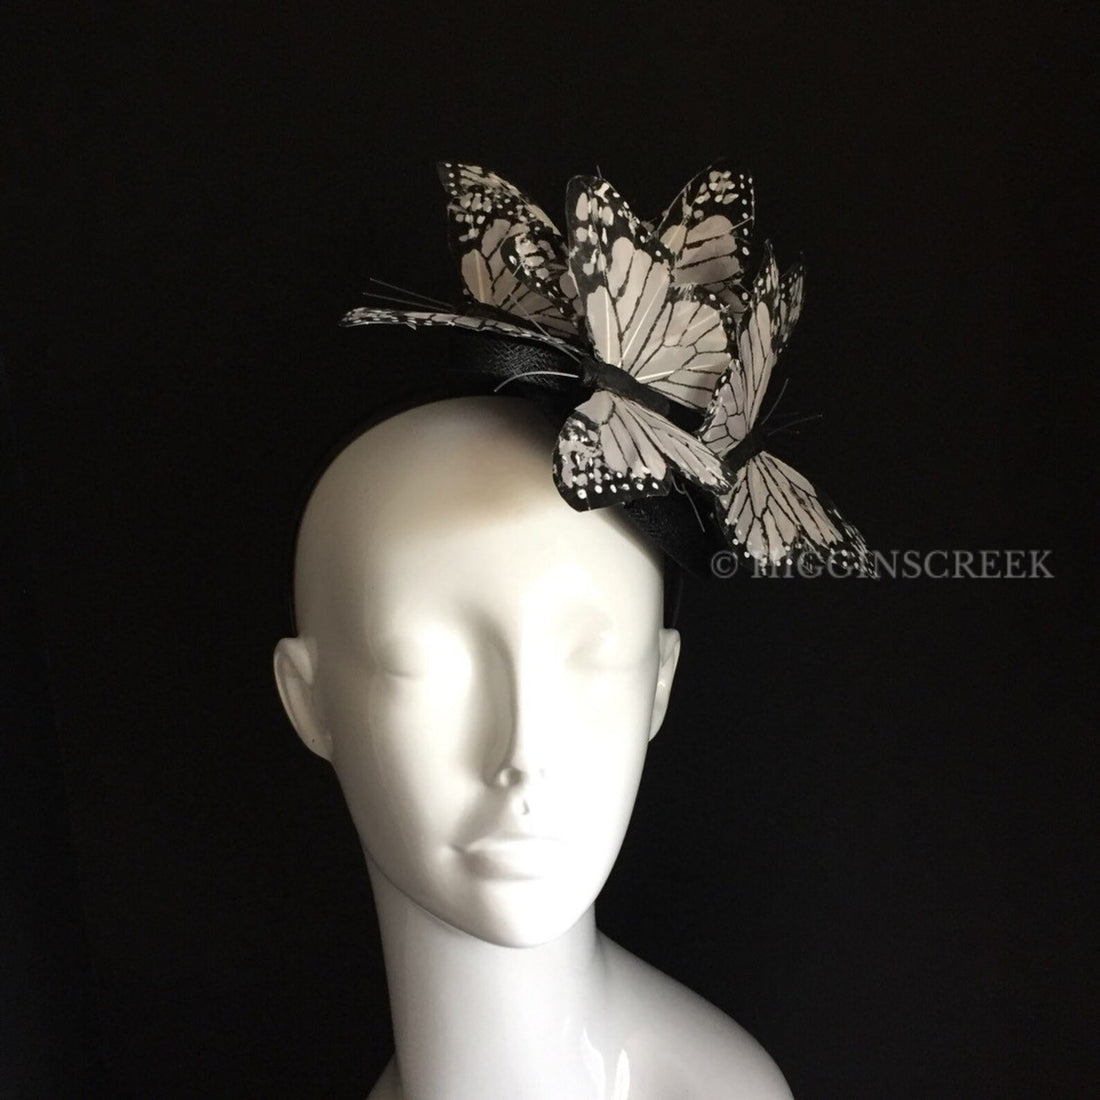 Kentucky derby style tea party fascinator hat with six white/black butterflies on a black base for sale.